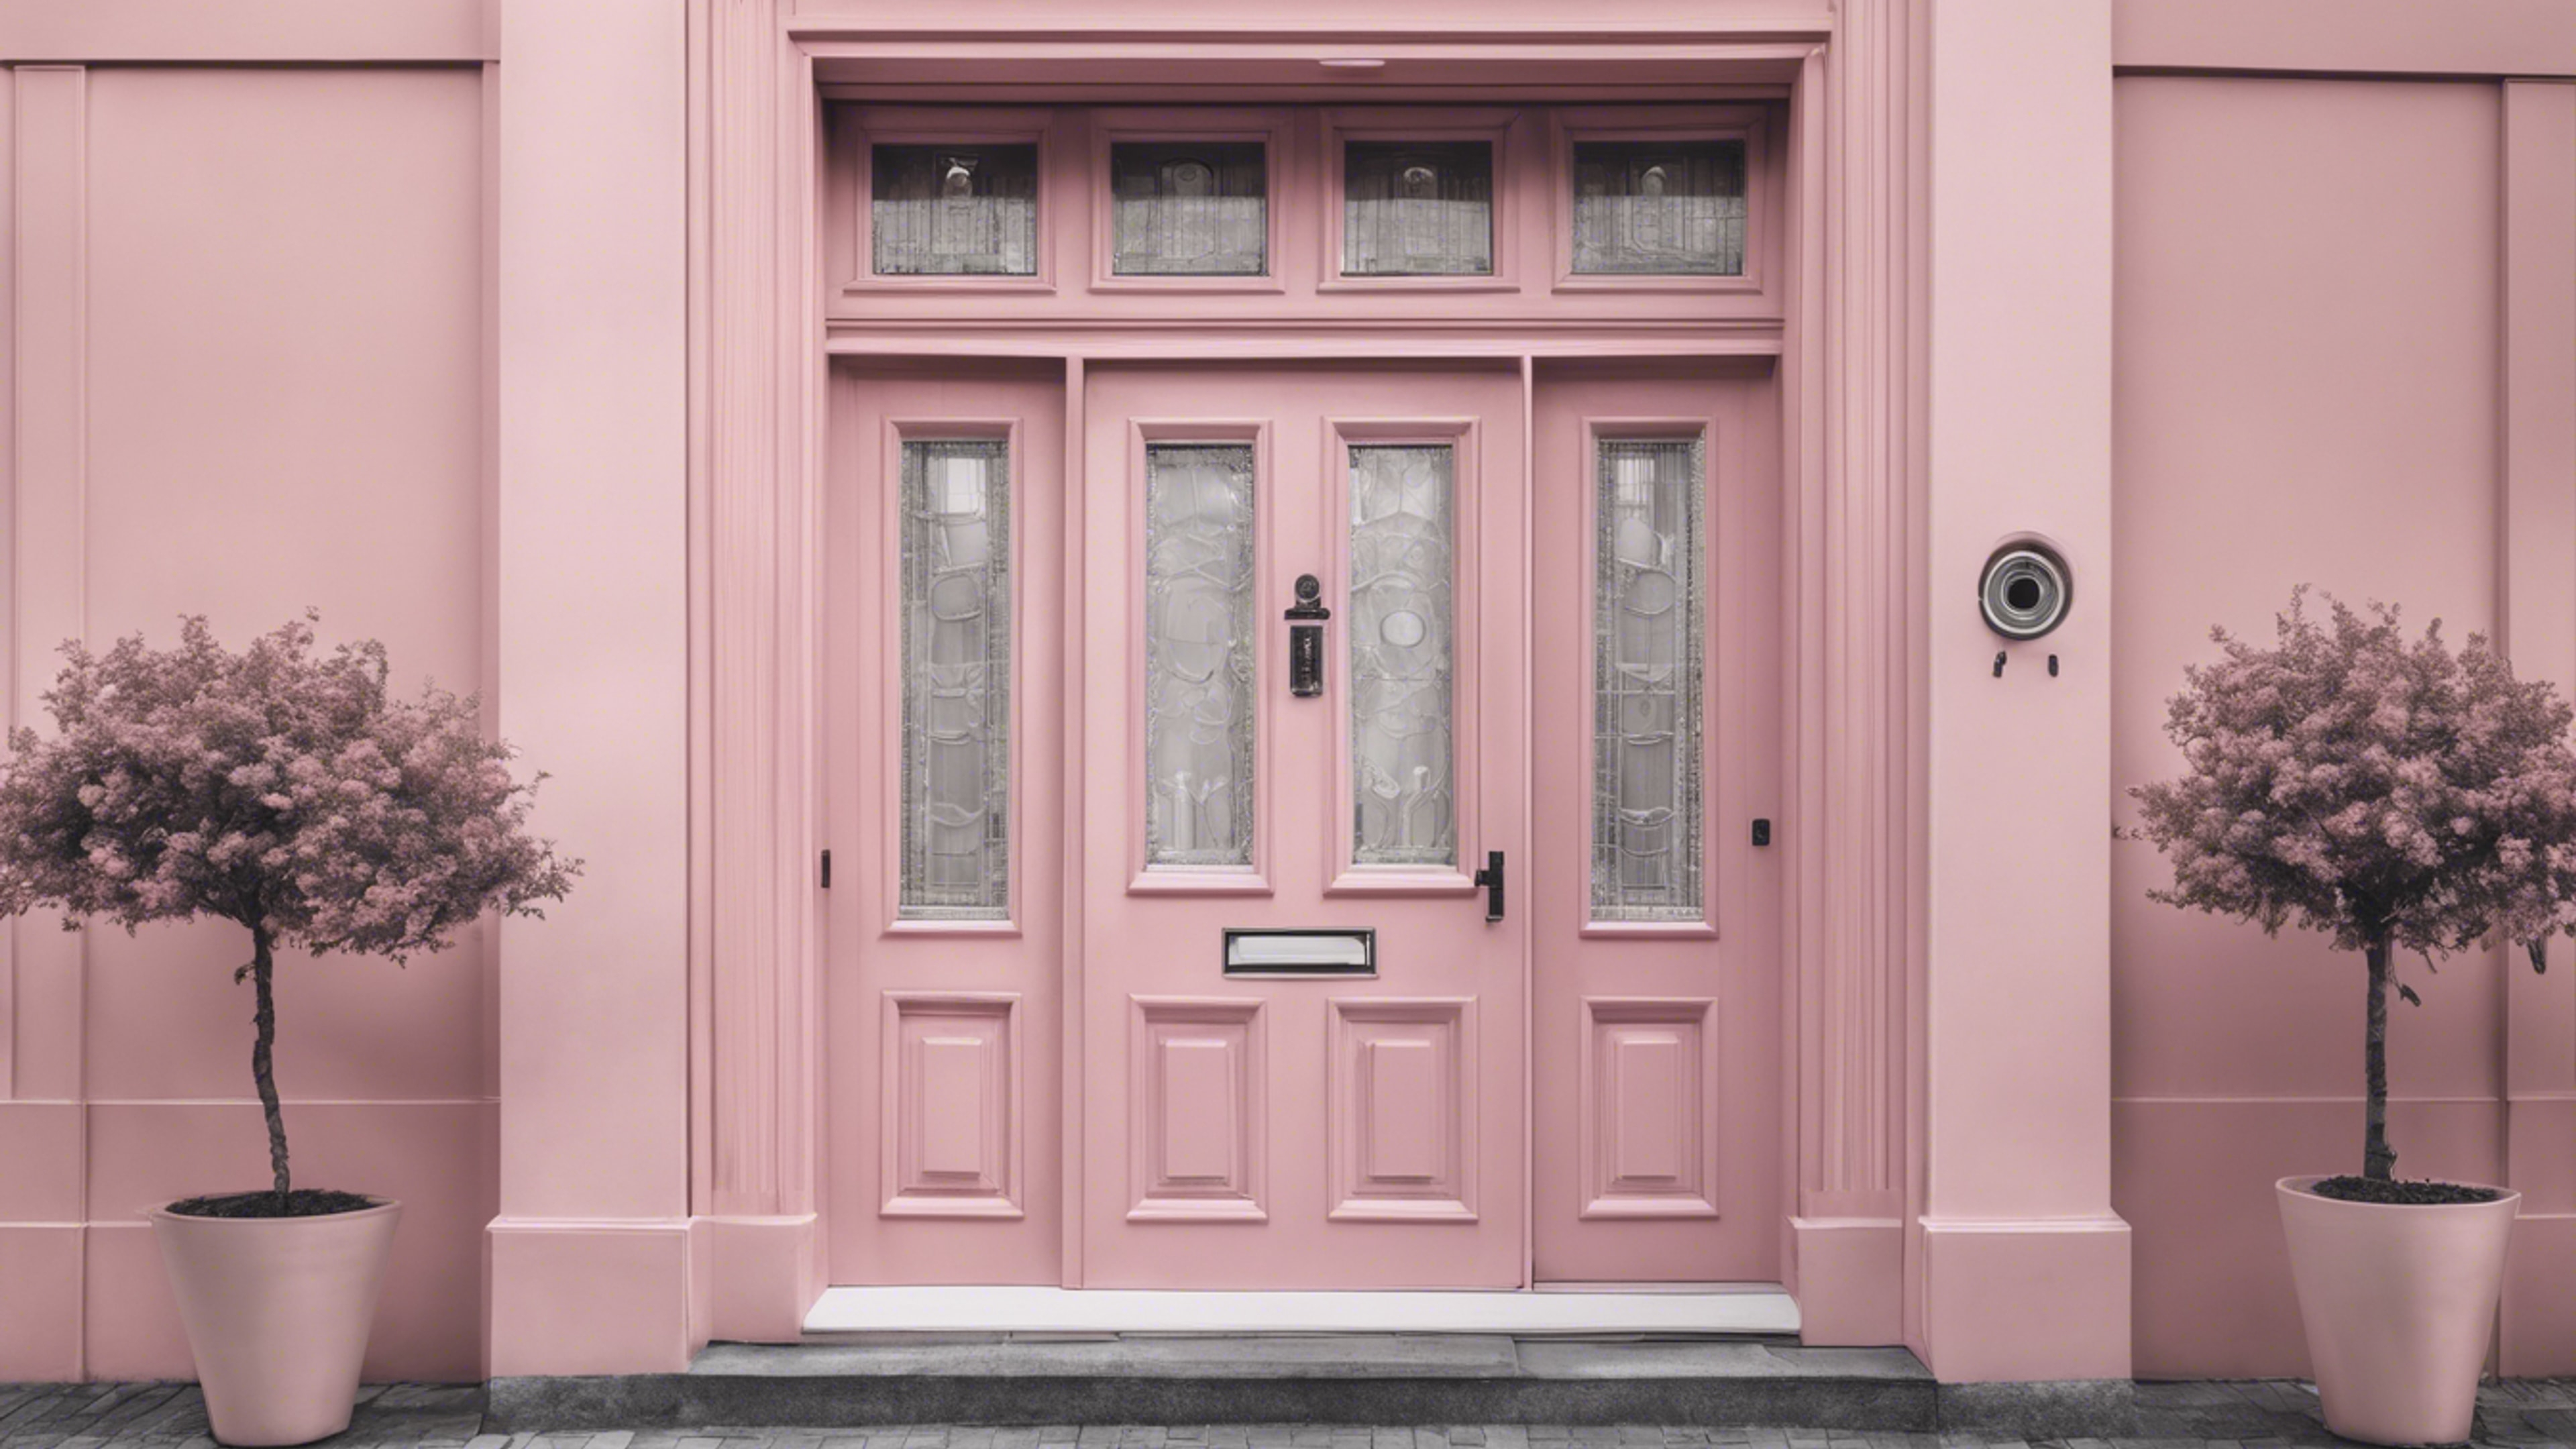 Monochrome image of a sophisticated townhouse door painted in a fetching preppy pastel pink. Tapeta[a9cdce63c1c94c029691]